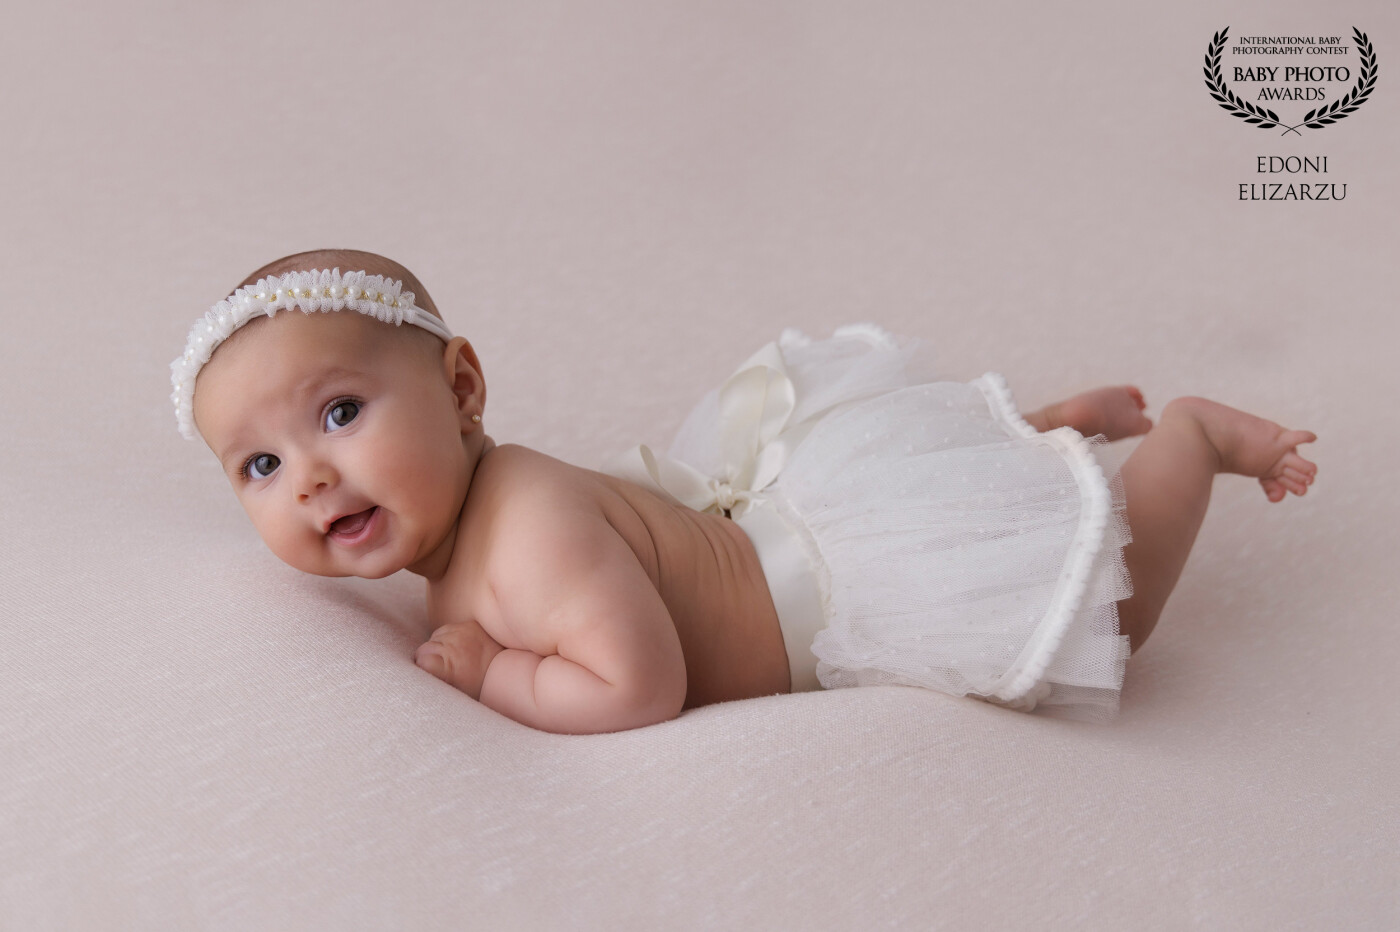 Beautiful baby girl! She was smiling all the photoshoot! Love this pic.